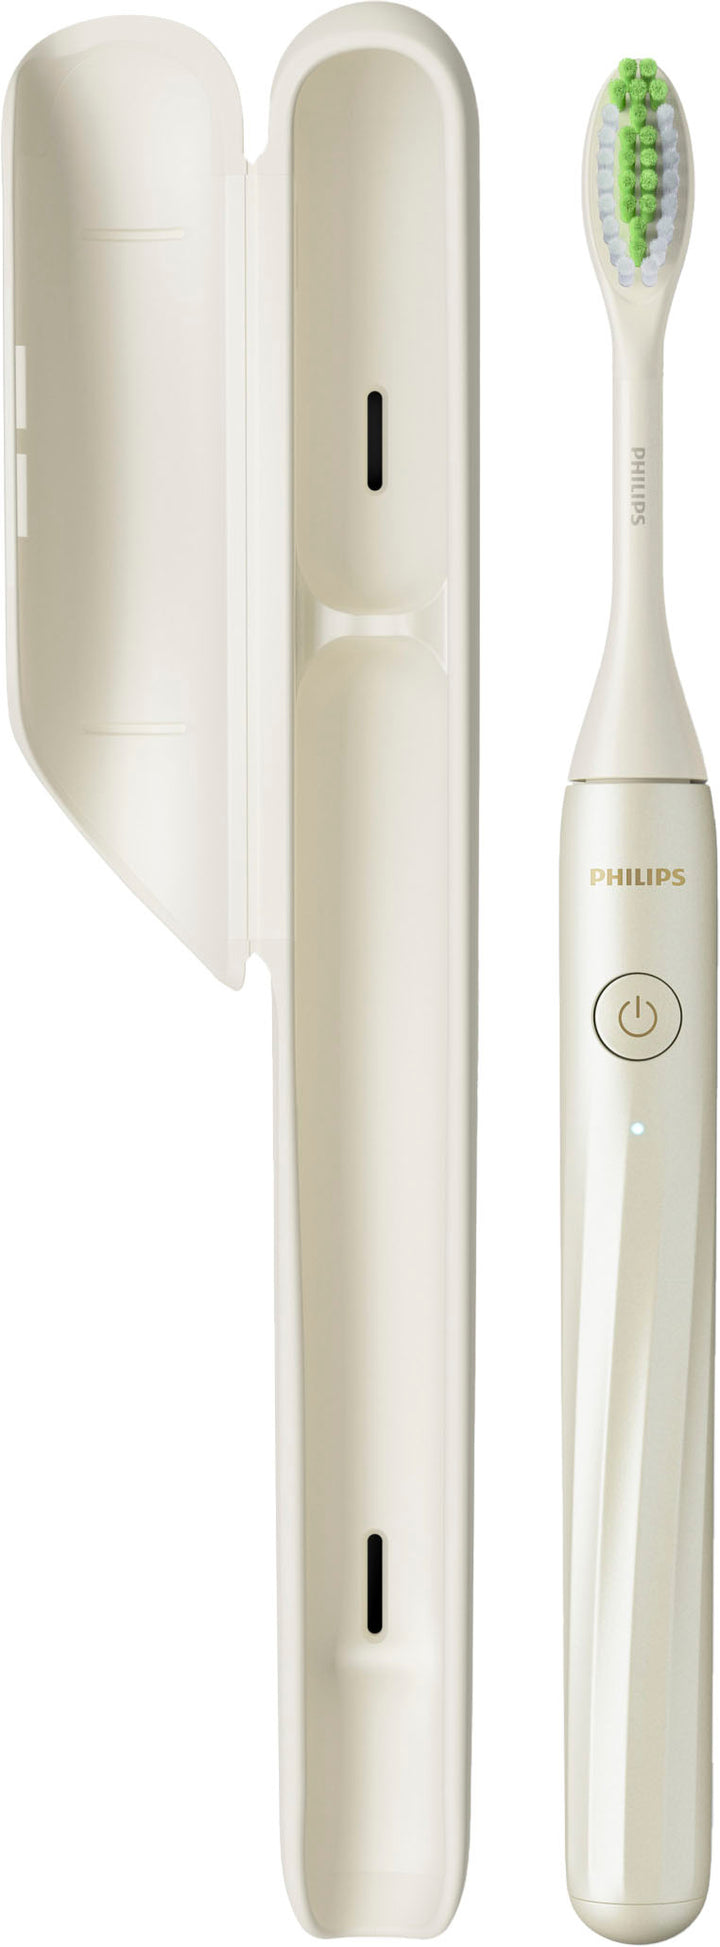 Philips One by Sonicare Rechargeable Toothbrush, Snow, HY1200/27 - Snow_3